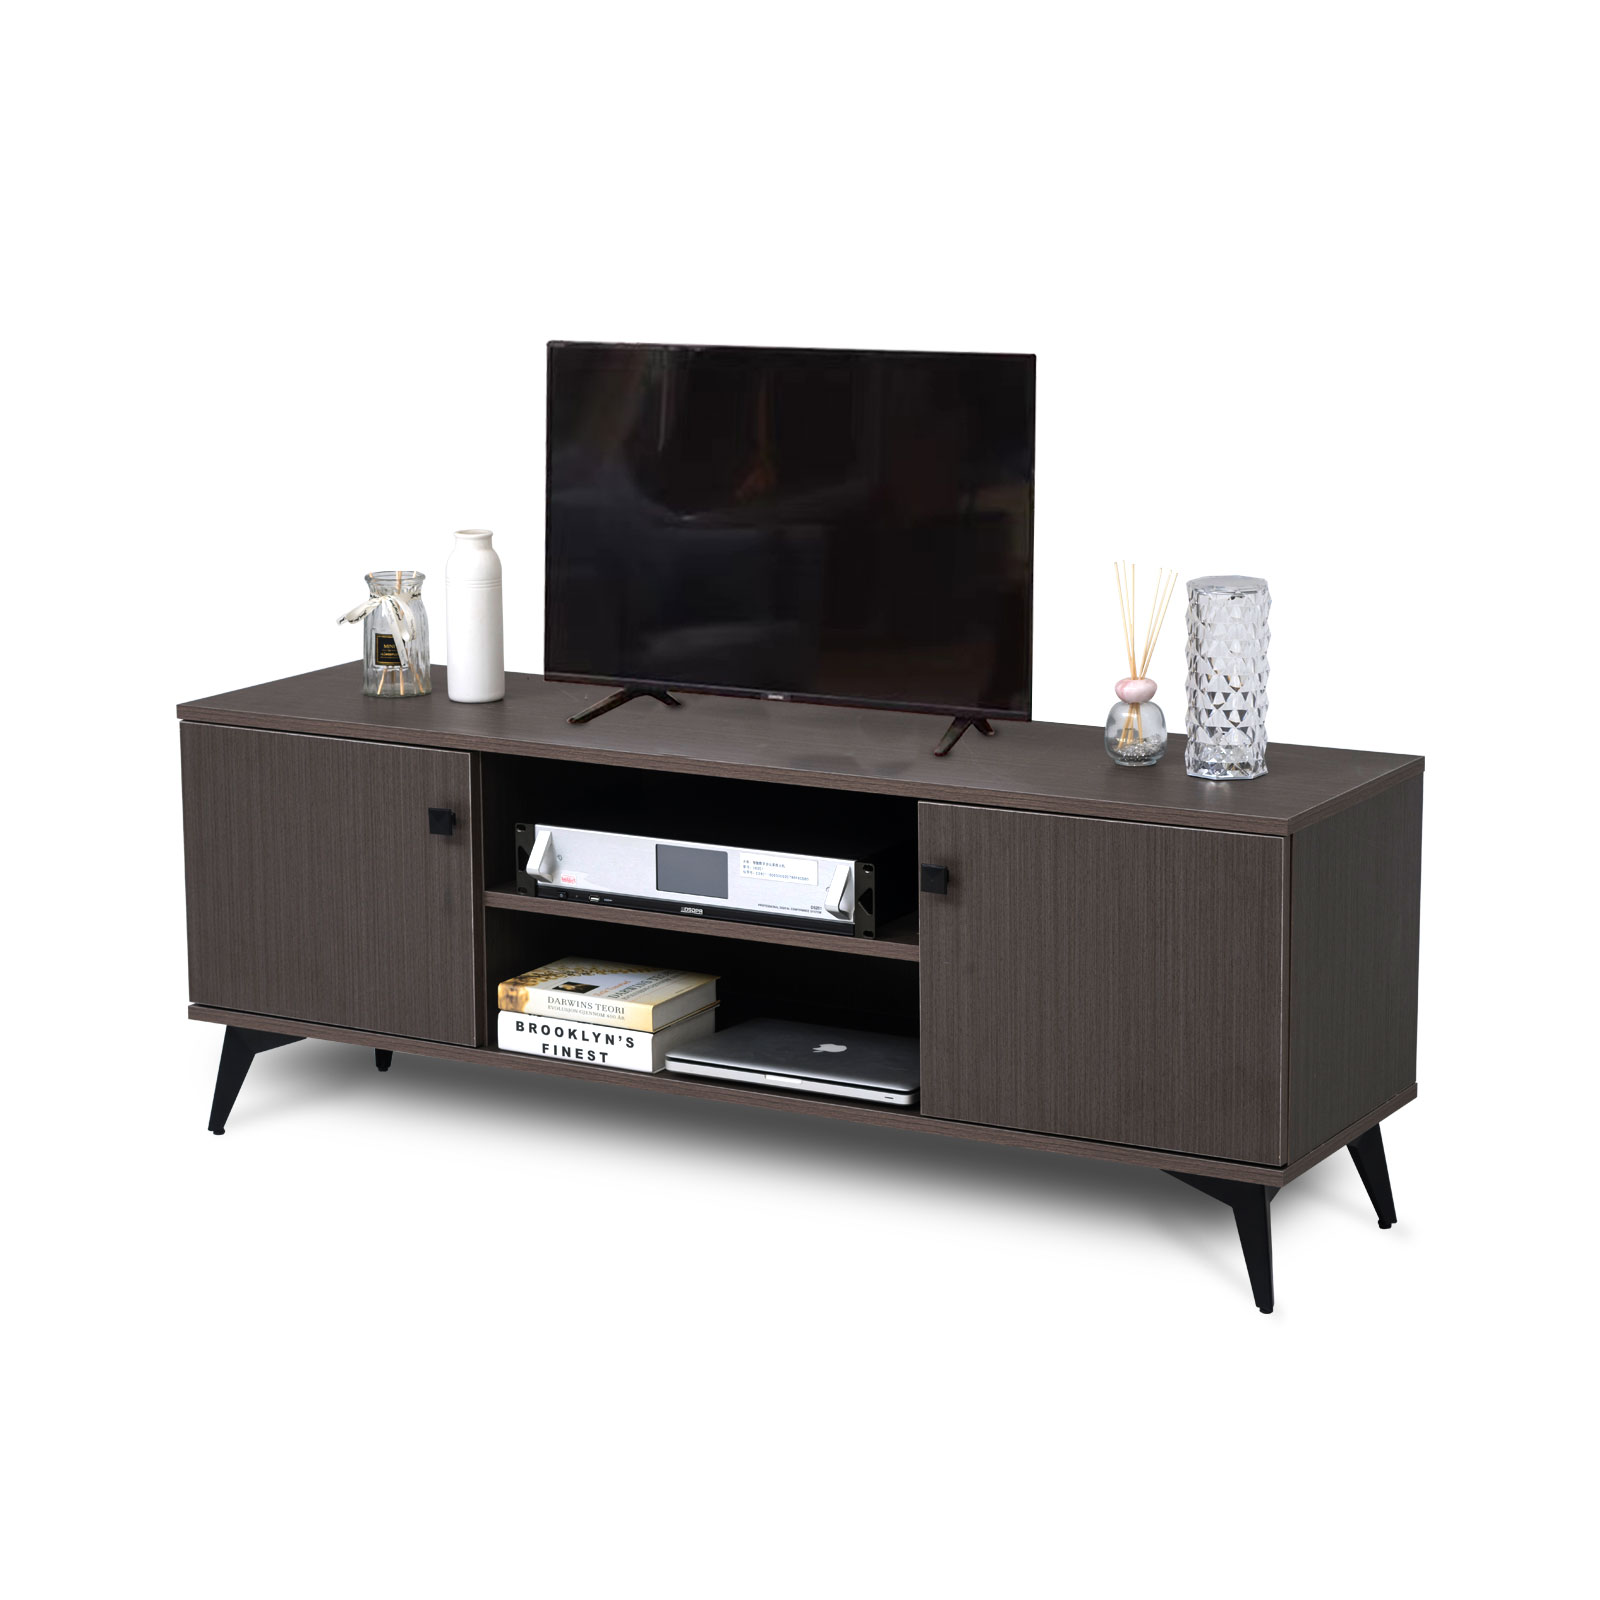 Mid-Century Modern TV Stand for up to 58 inch TV Television Stands with Cabinet Wood Storage TV Console Table, Retro Media Entertainment Center for Living Room, Rustic Brown